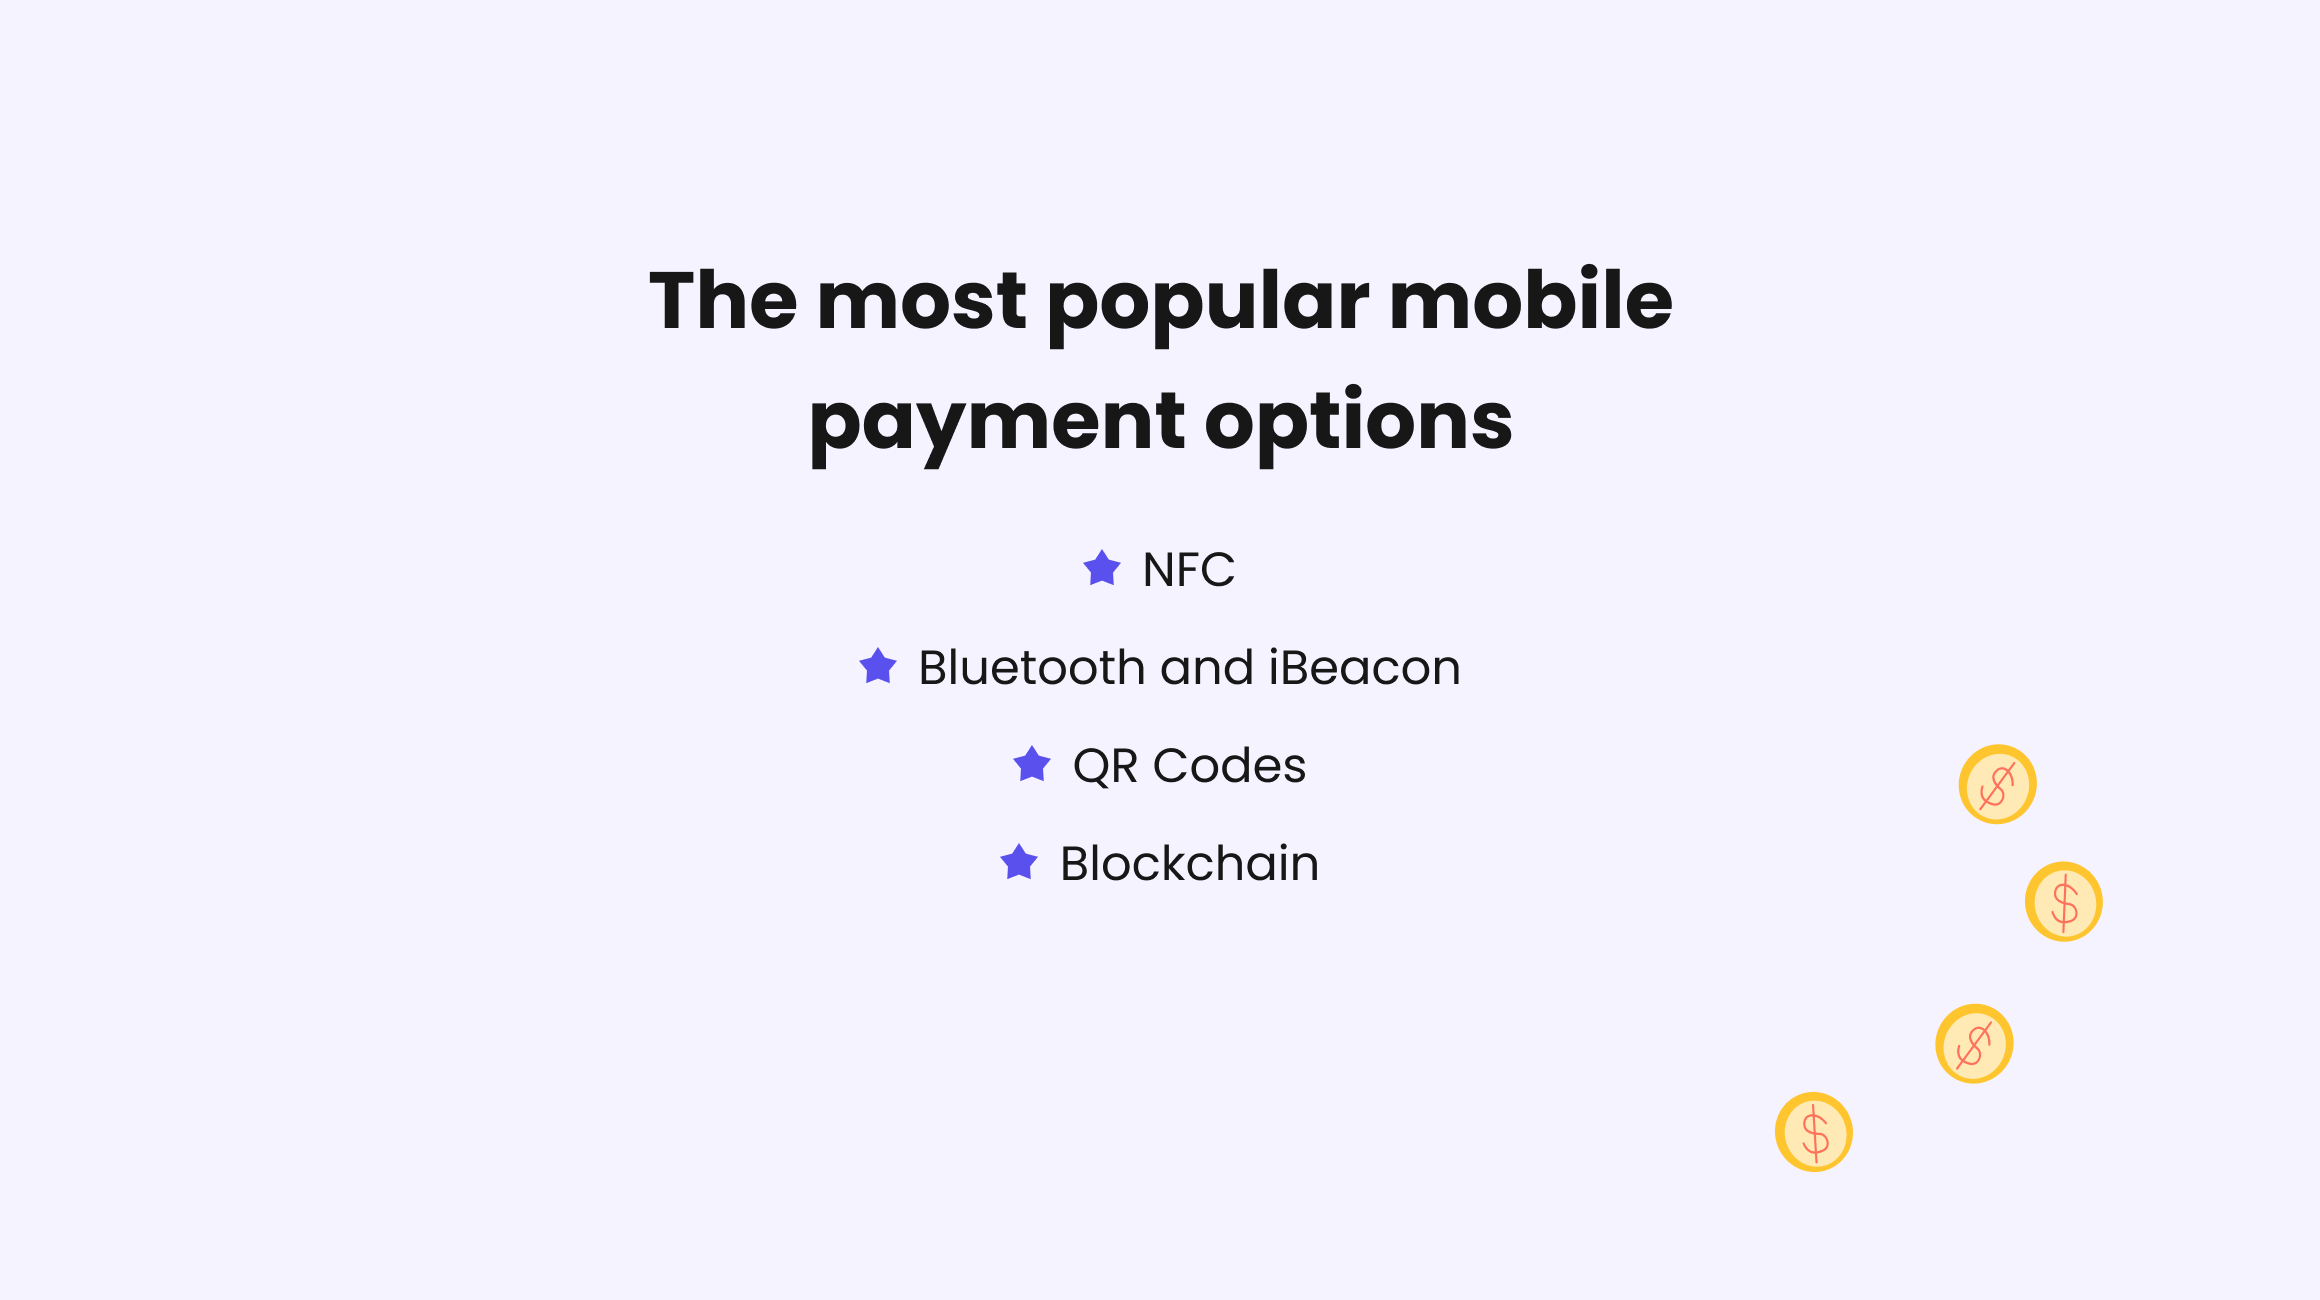 The most popular mobile payment options